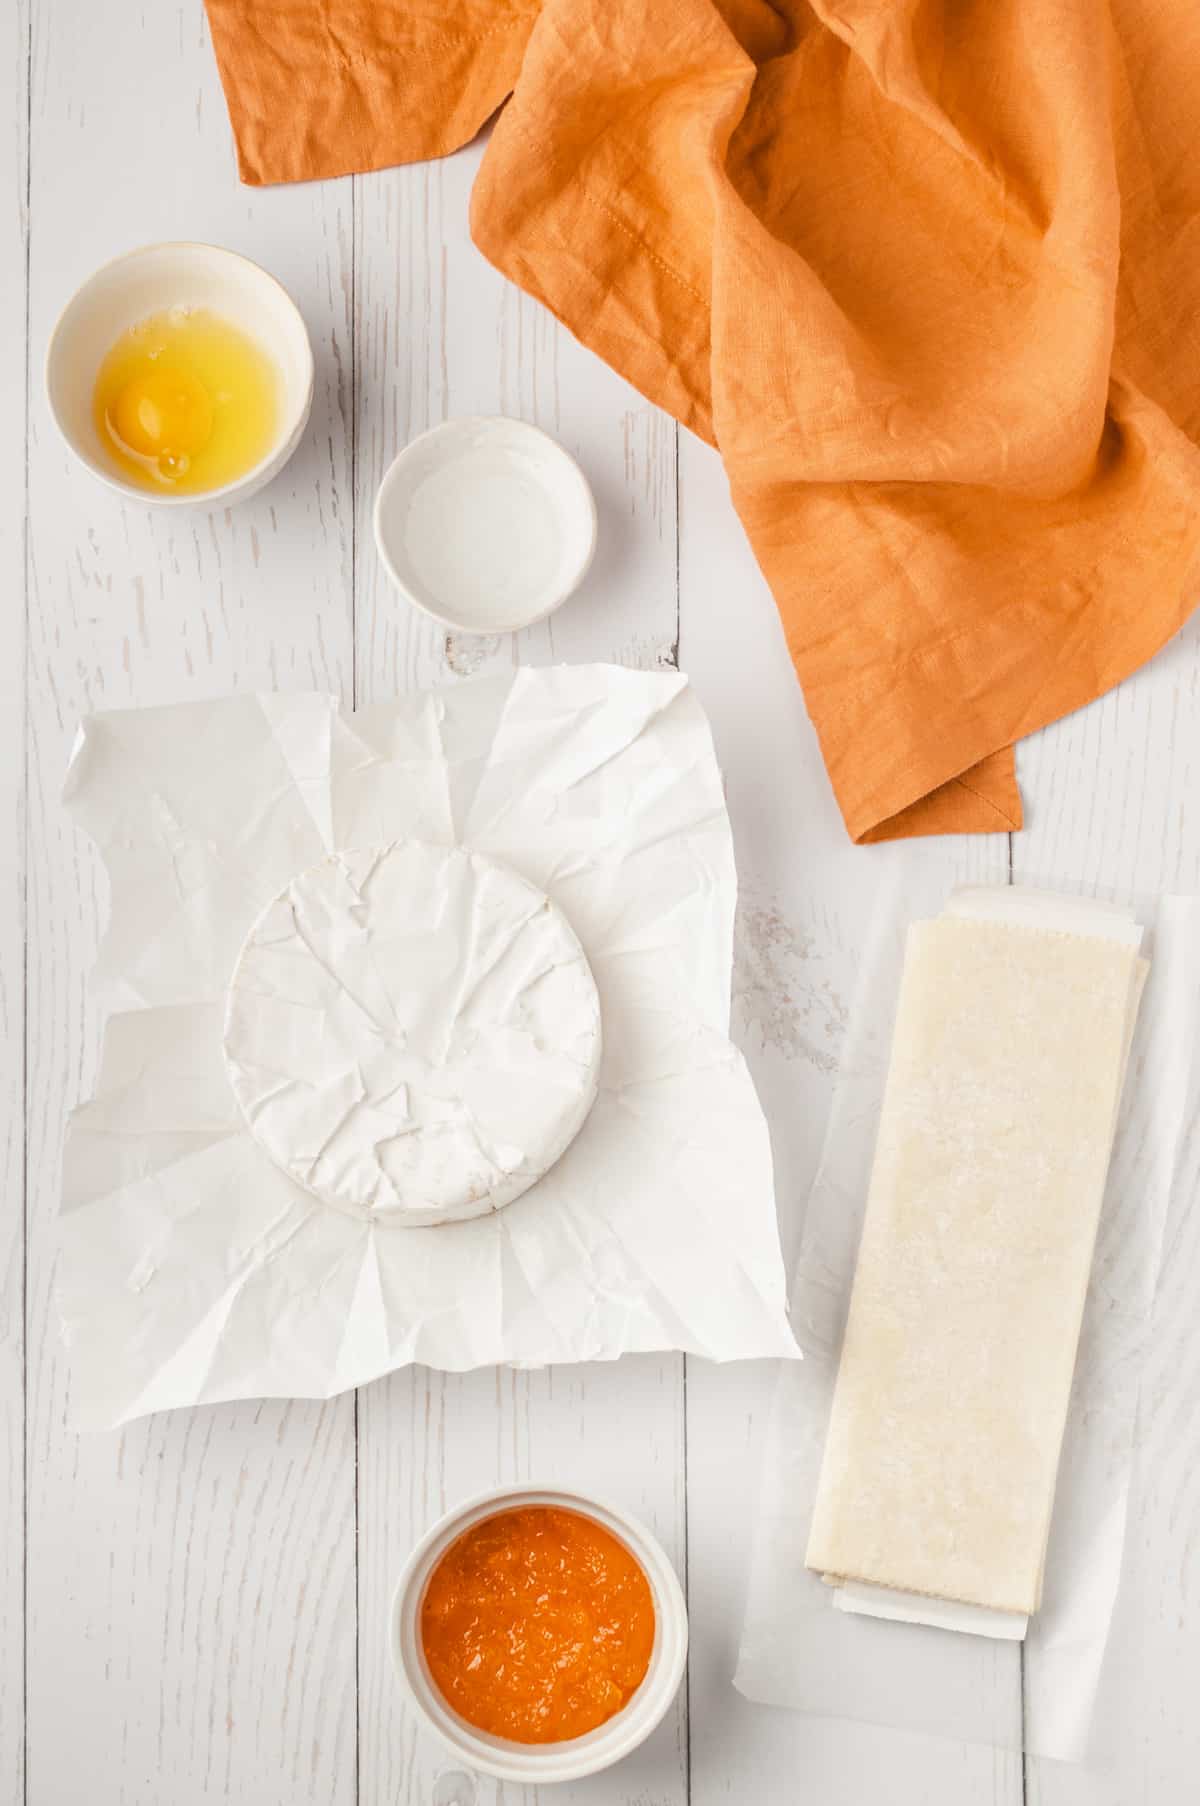 Overhead view of ingredients for baked brie